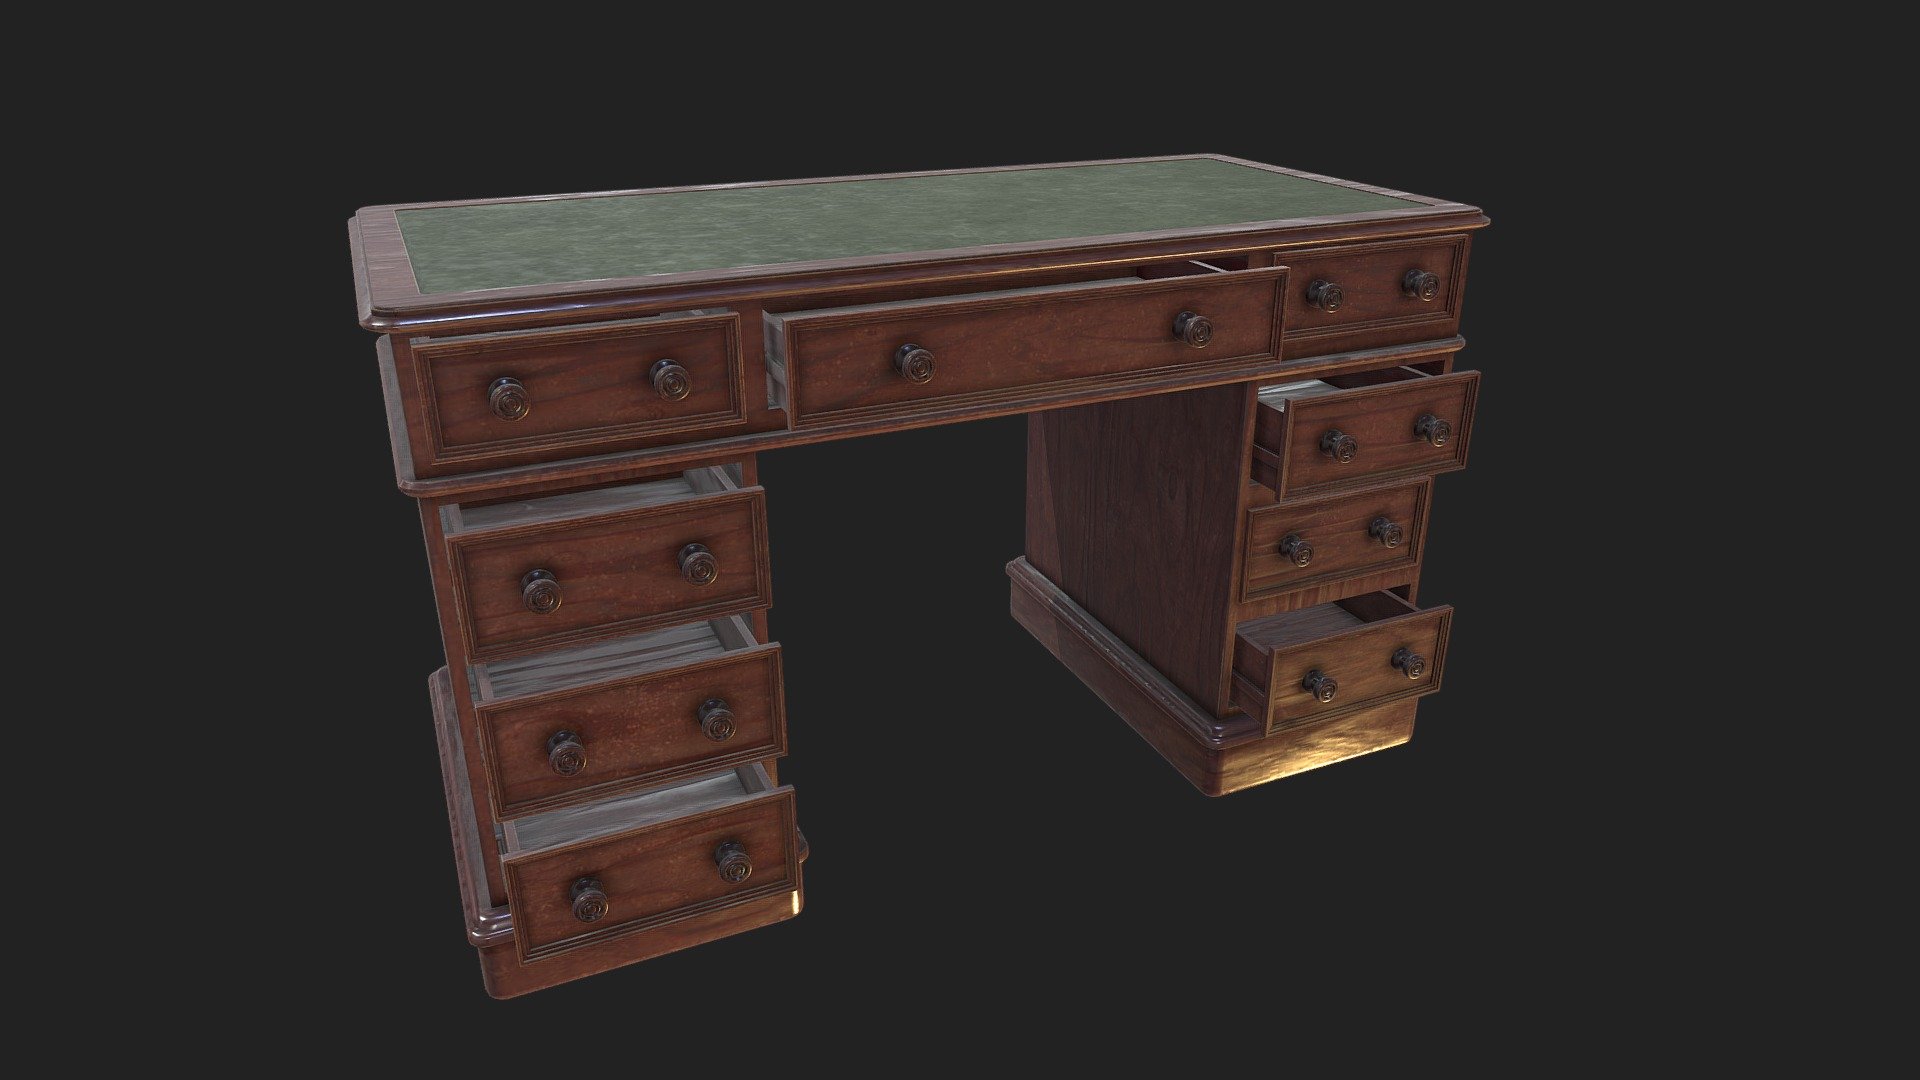 2x 2048x2048 texture packs (PBR Metal Rough, Unity HDRP, Unity Standard Metallic and Unreal Engine), one for the desk and the other for the drawers:

PBR Metal Rough: BaseColor, AO, Height, Normal, Roughness and Metallic;

Unity HDRP: BaseColor, MaskMap, Normal;

Unity Standard Metallic: AlbedoTransparency, MetallicSmoothness, Normal;

Unreal Engine: BaseColor, Normal, OcclusionRoughnessMetallic;

The package comes with .obj, .fbx, .dae and .blend files 3d model